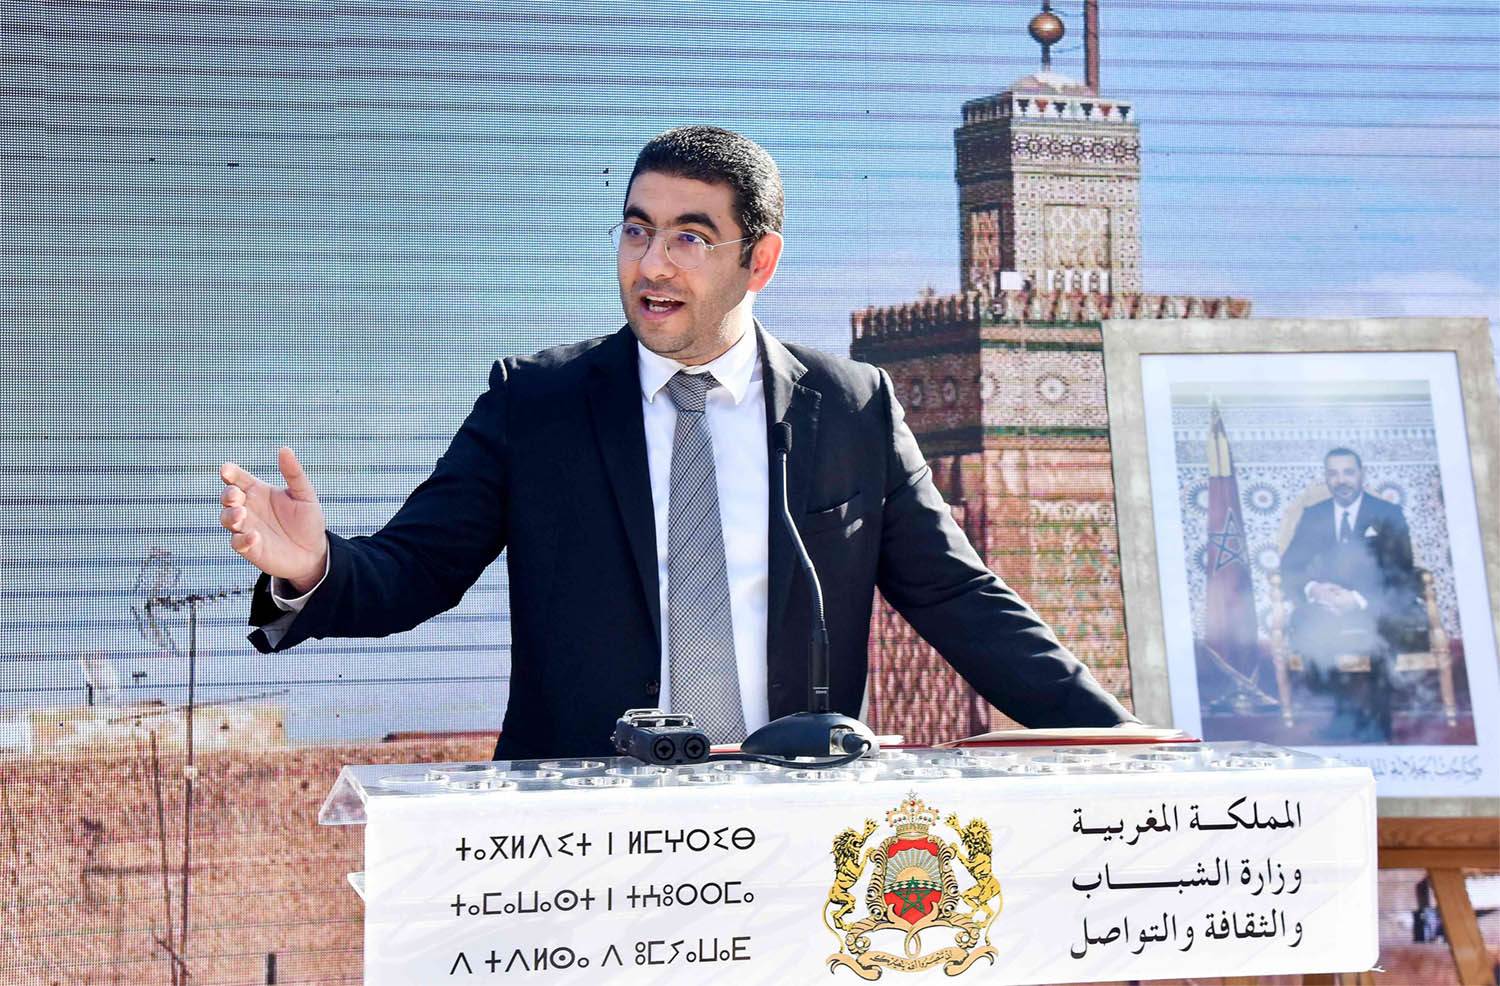 Morocco's Minister of Youth, Culture and Communication Mohamed Mehdi Bensaid